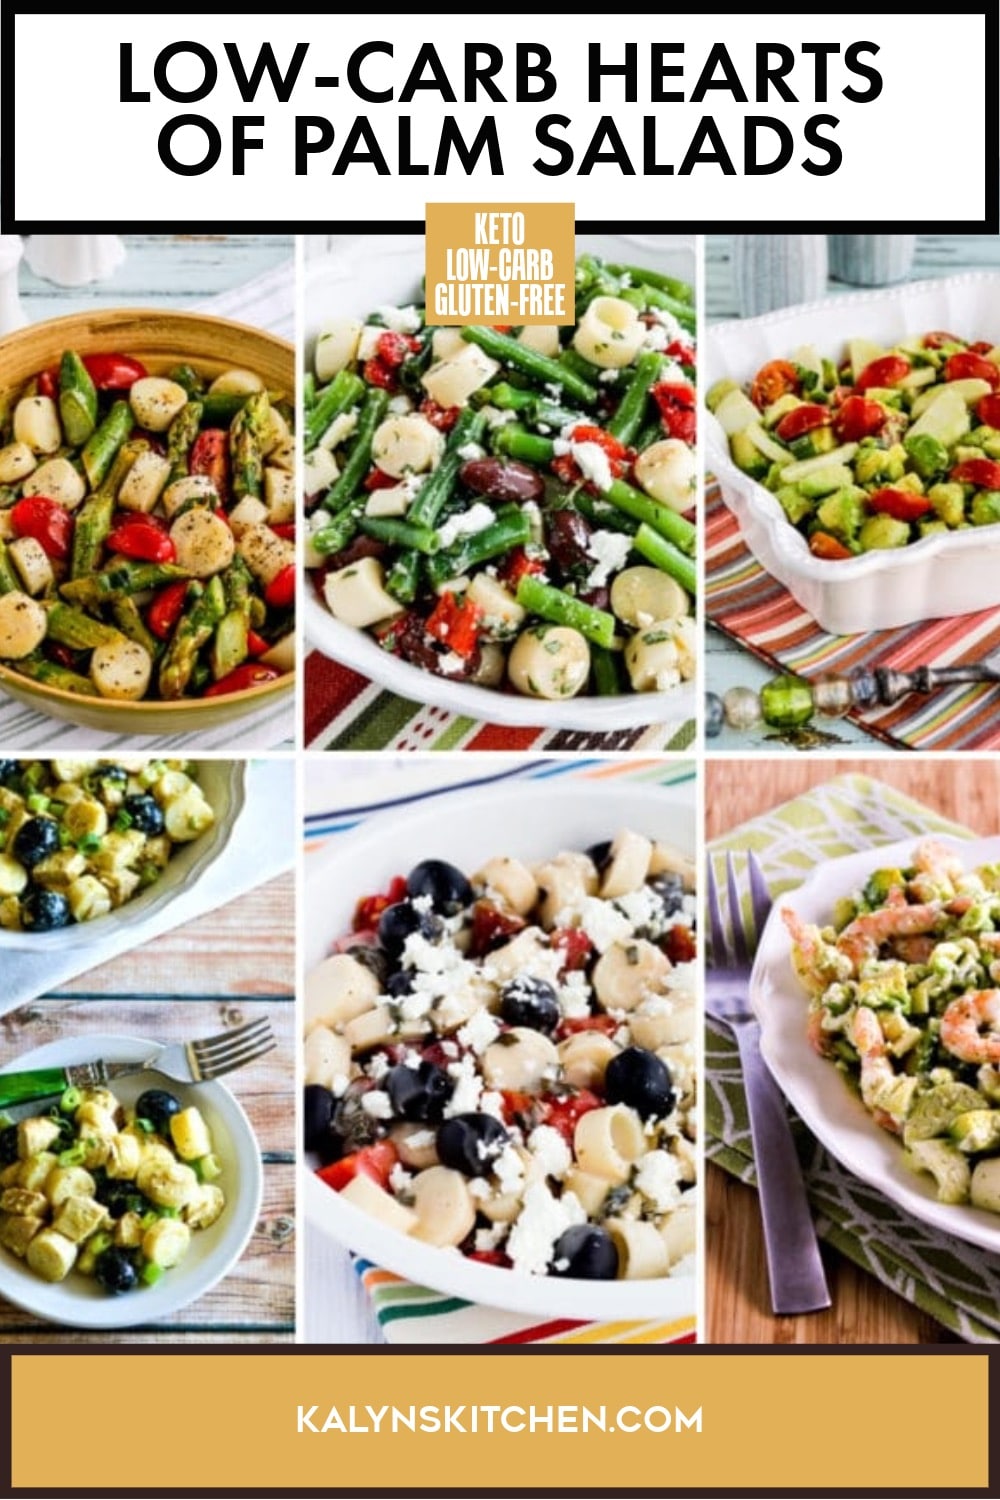 Pinterest image of Low-Carb Hearts of Palm Salads